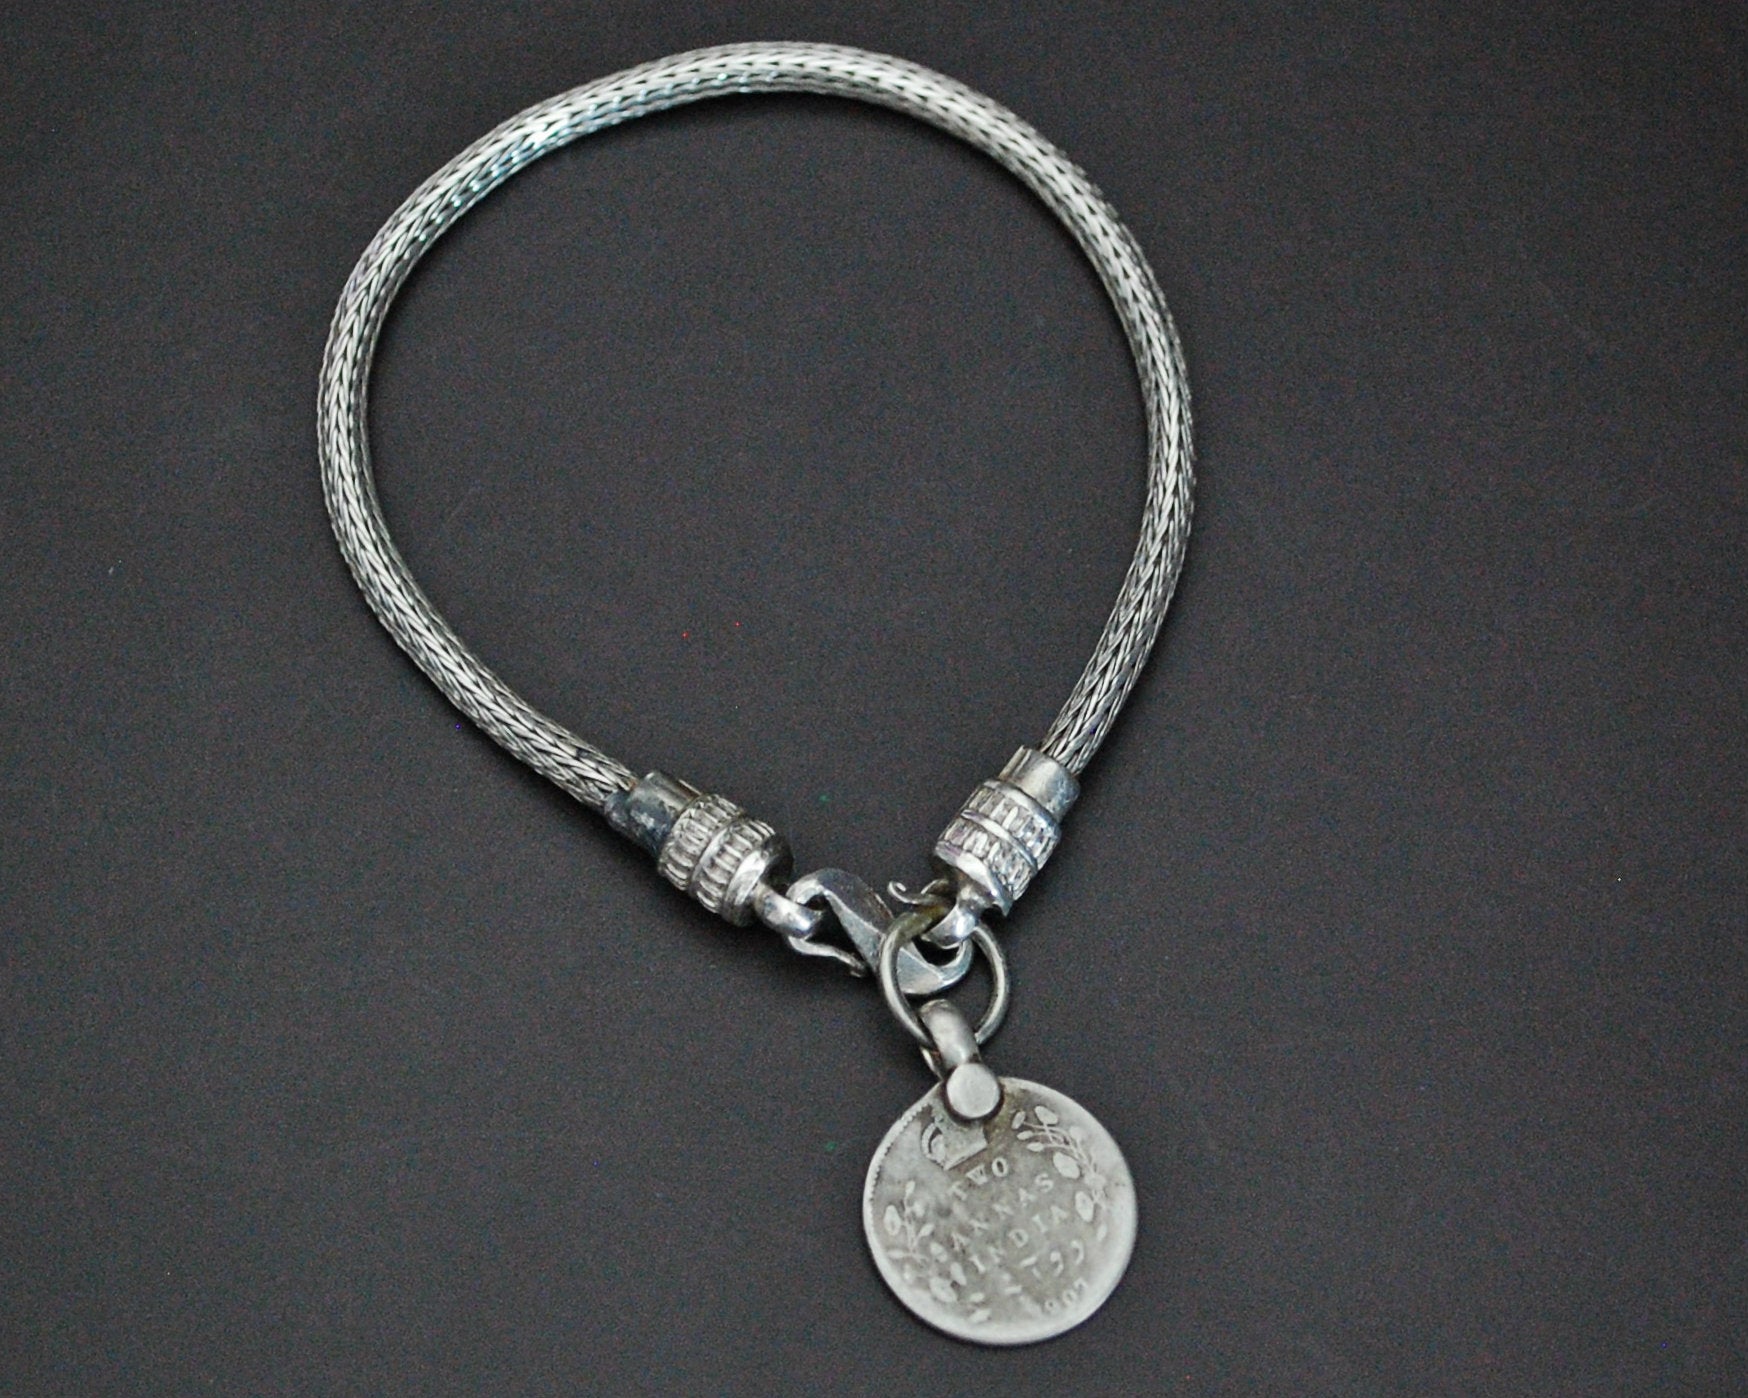 XS Rajasthani Snake Chain Bracelet with Coin